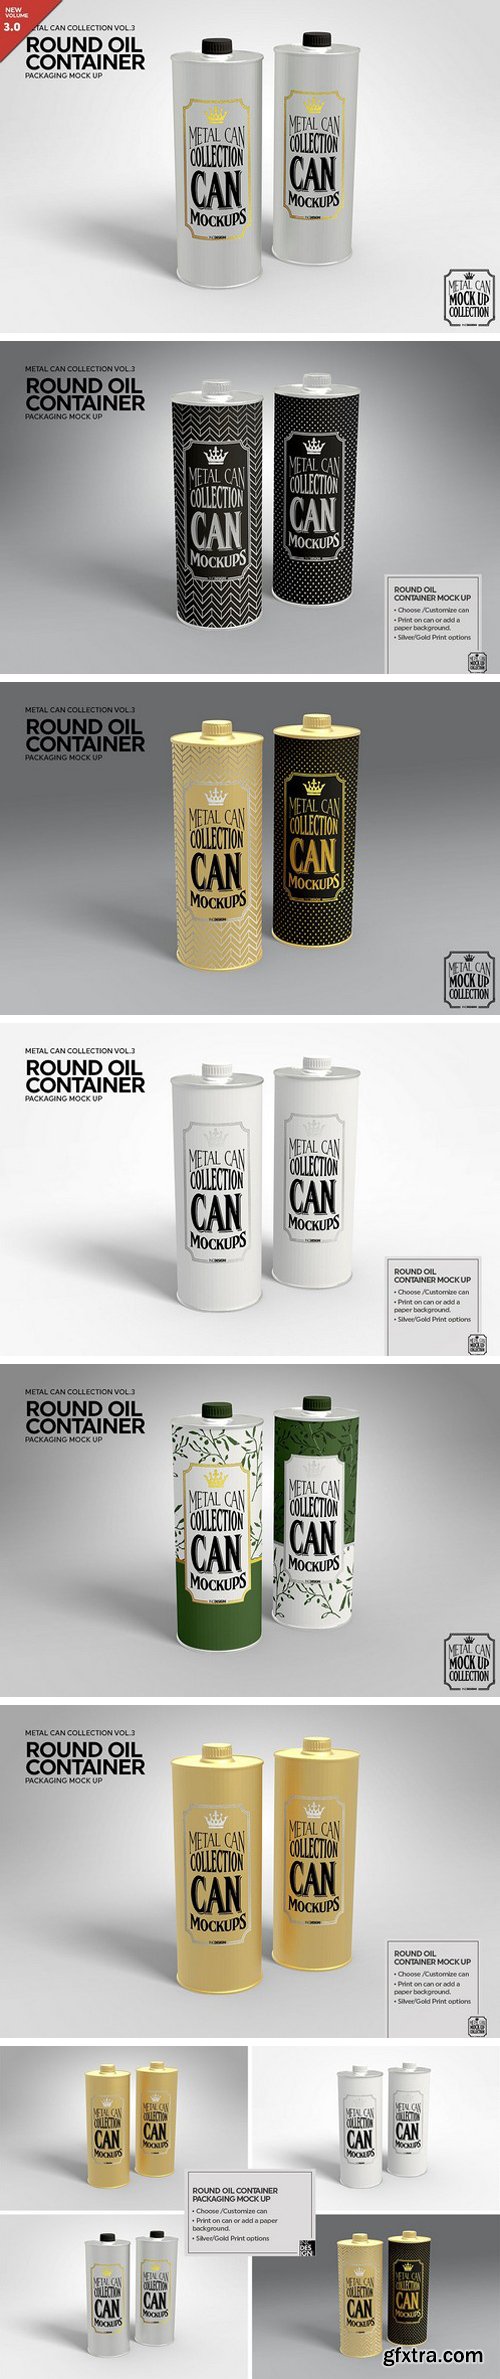 CM - Round Oil Container Mock Up 1926140